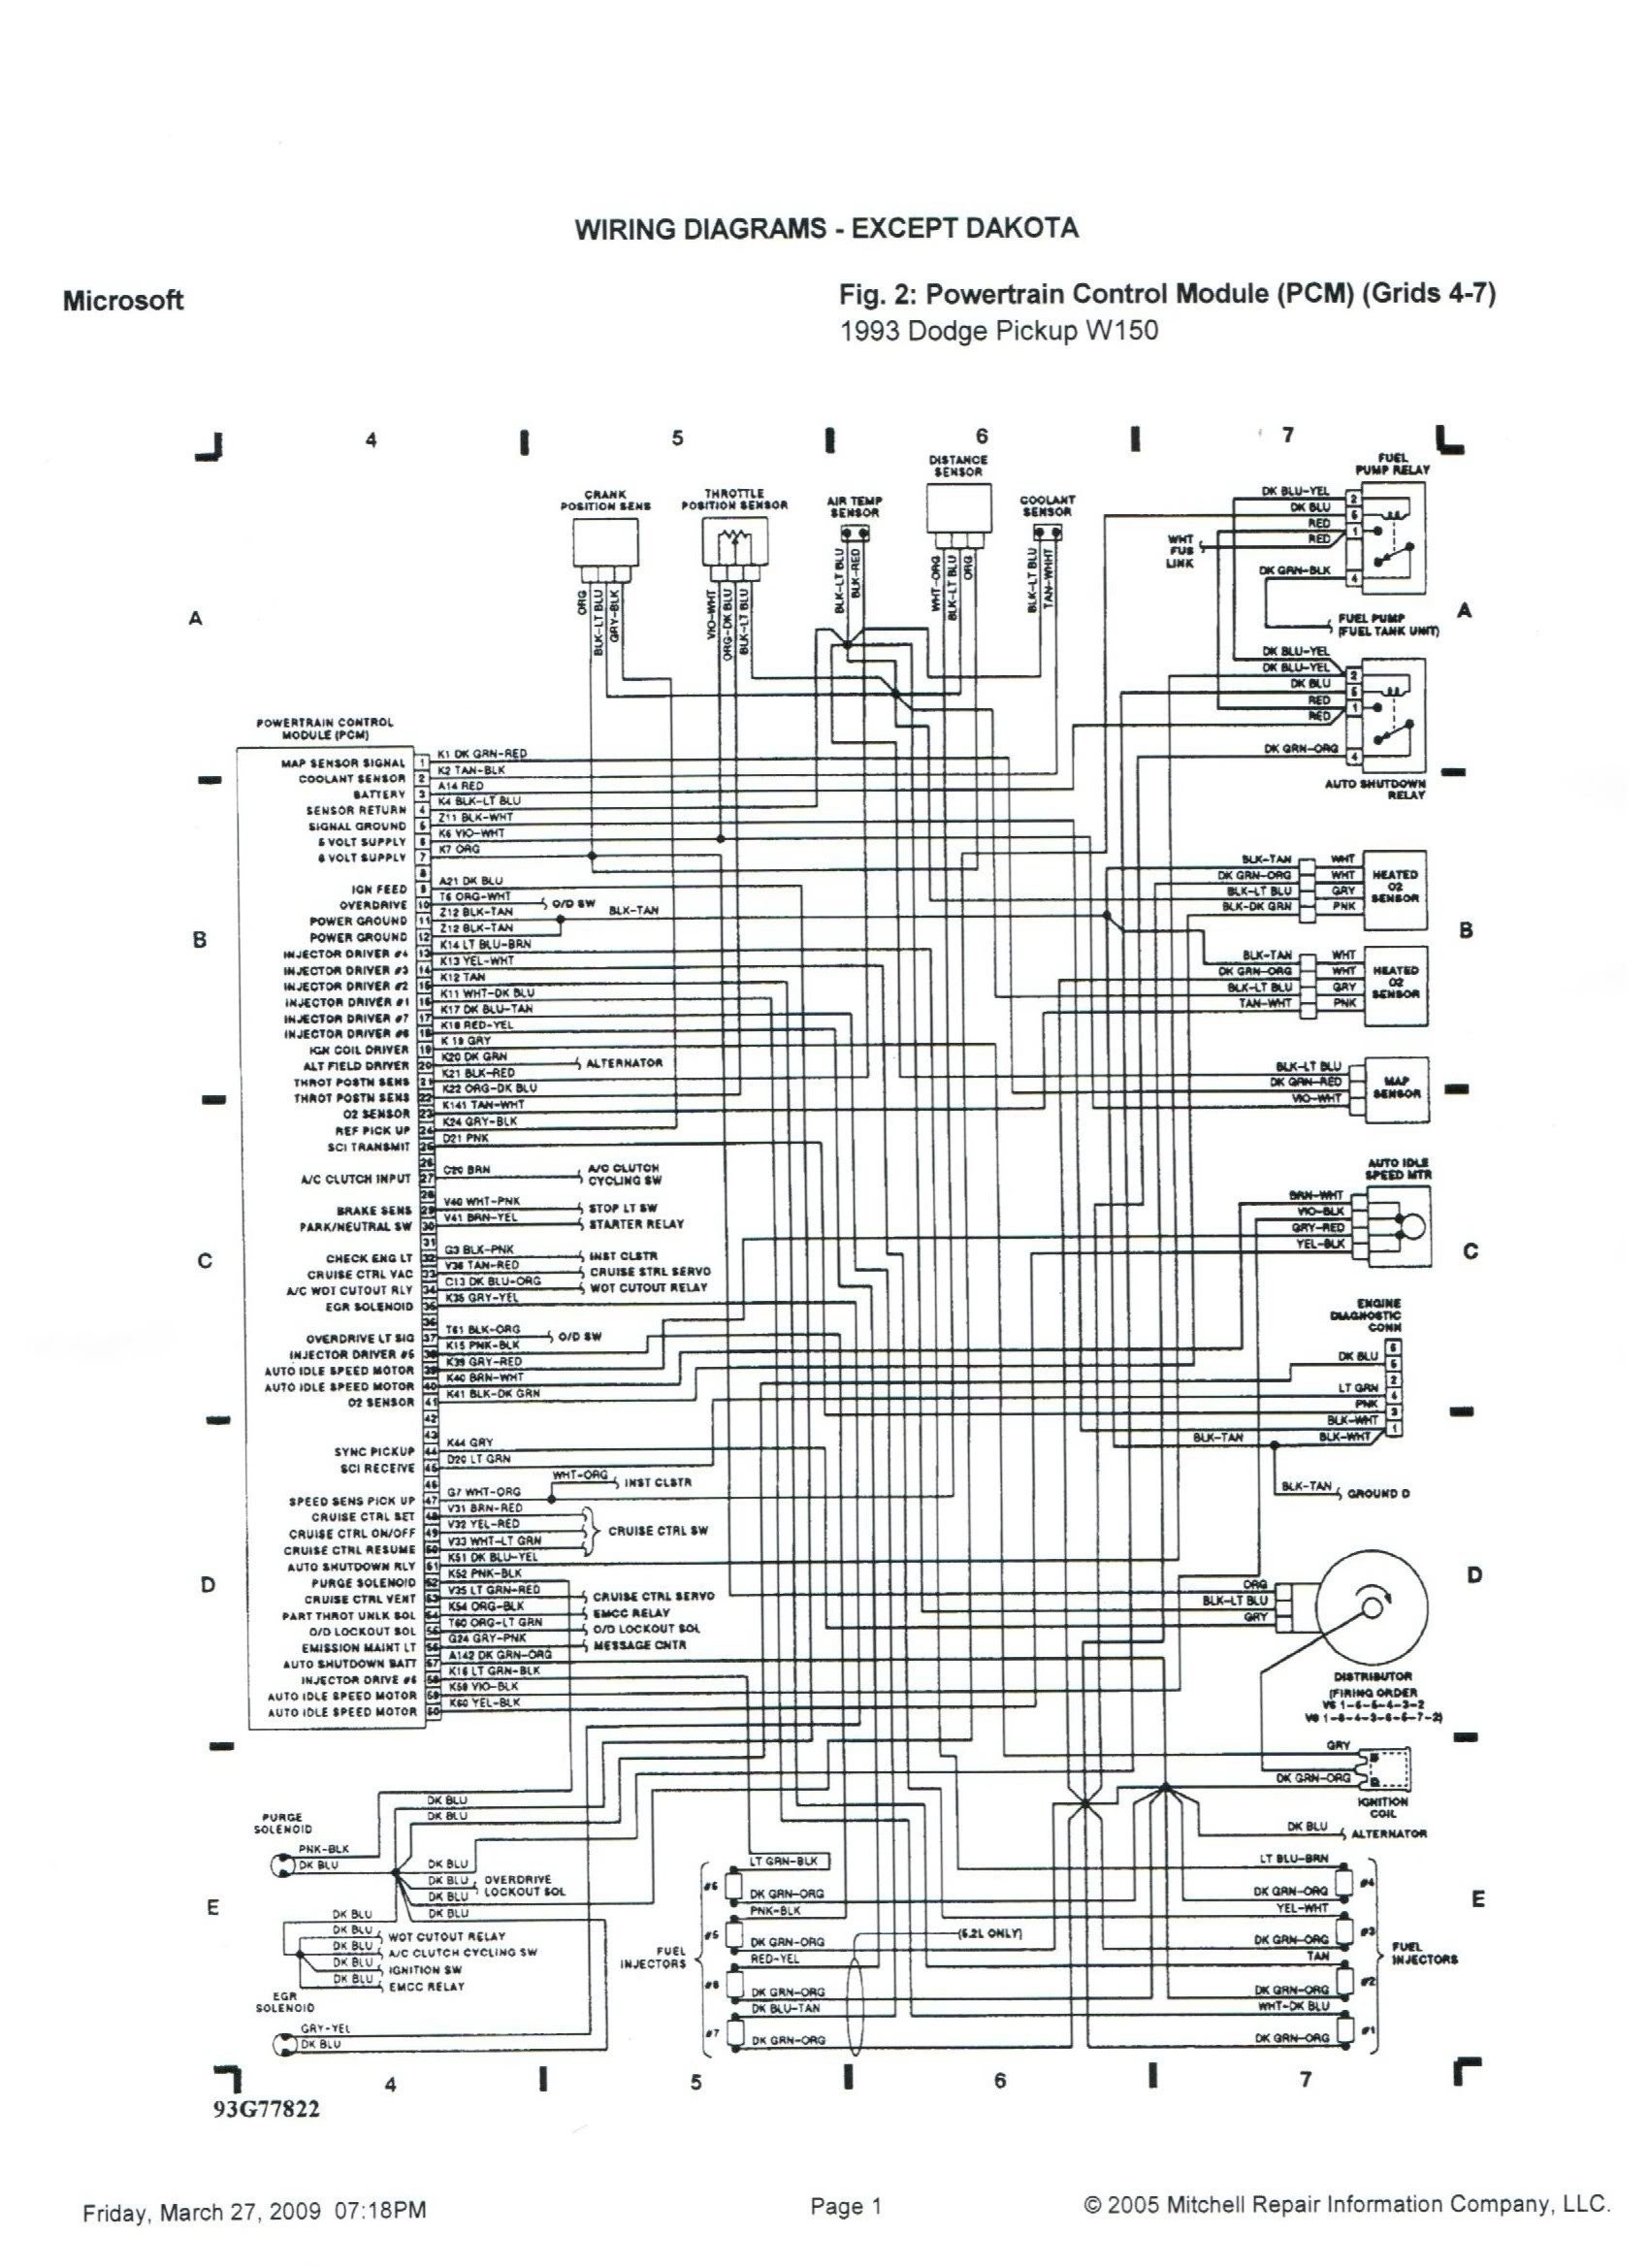 Plymouth Transmission Diagrams Wiring Diagrams Konsult 2002 Chrysler Town And Country Transmission Wiring